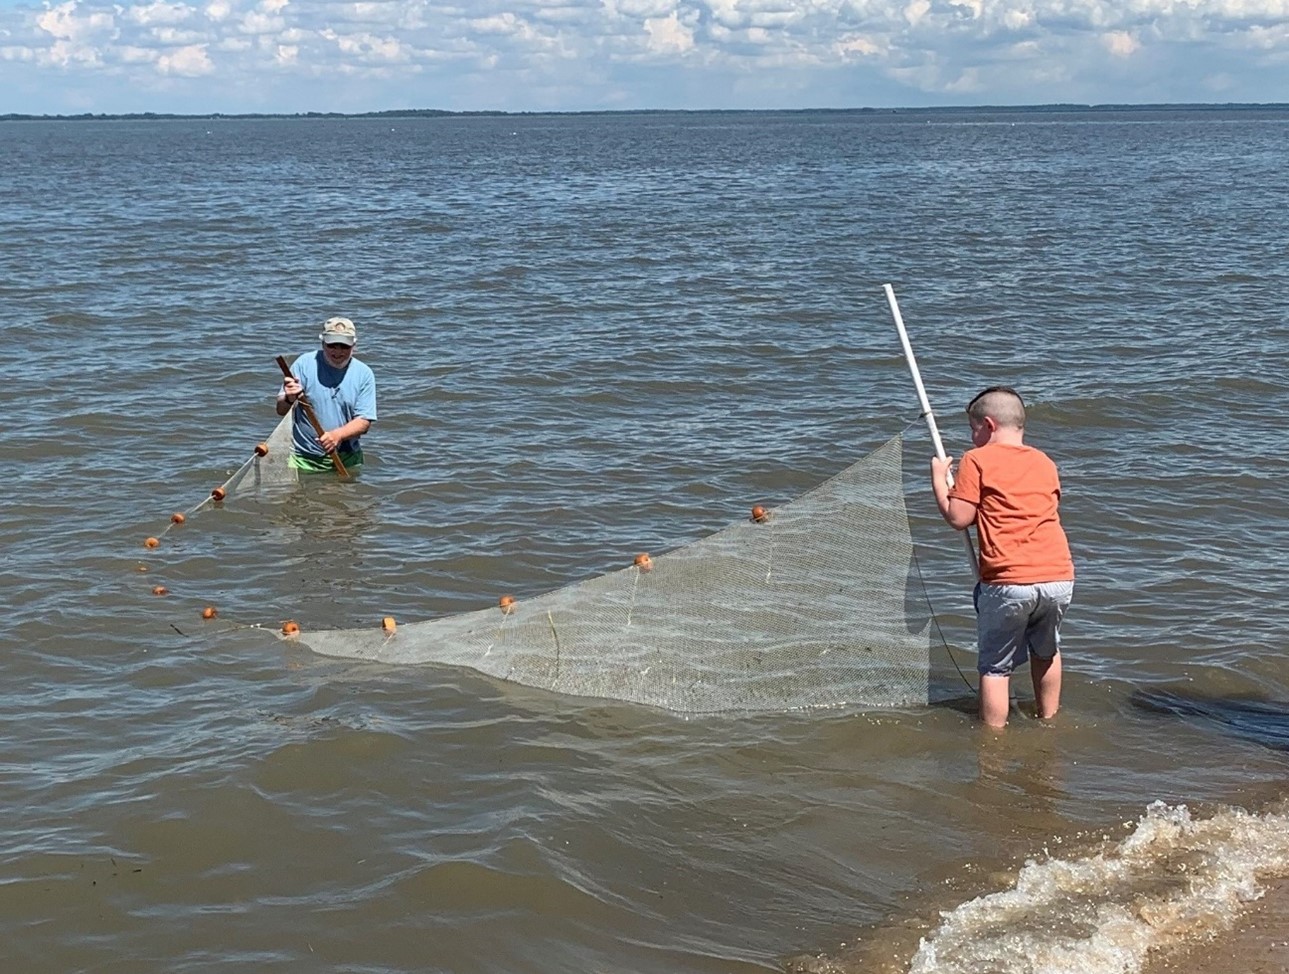 A child and an adult working a sein net in bay waters.